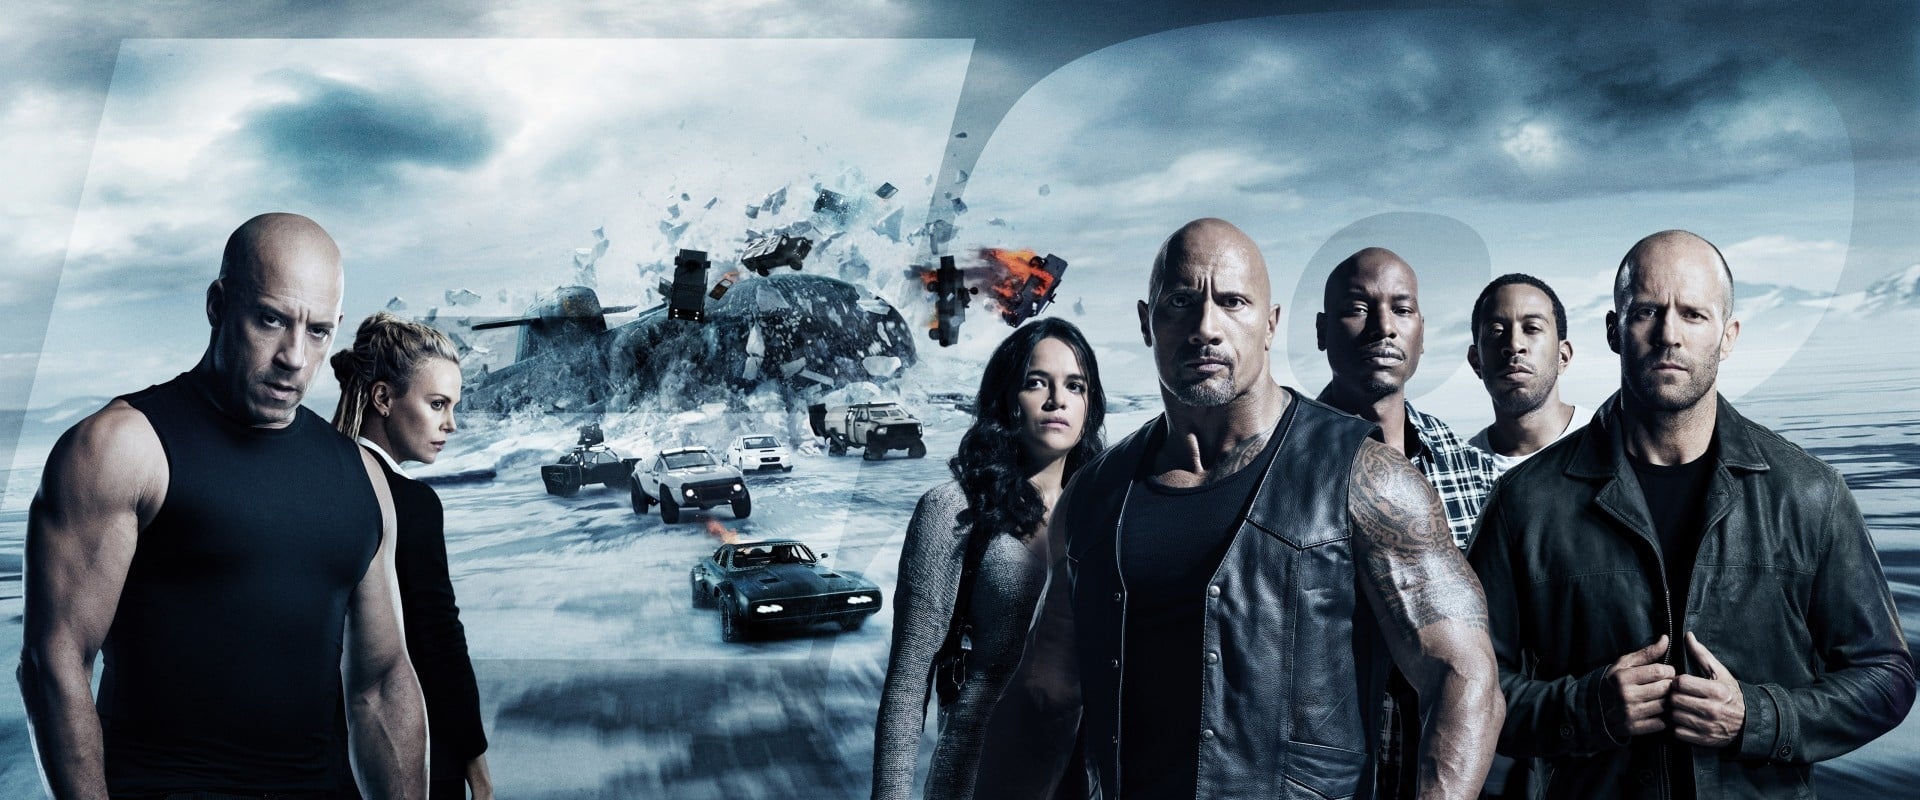 Fast and furious 8 movies123